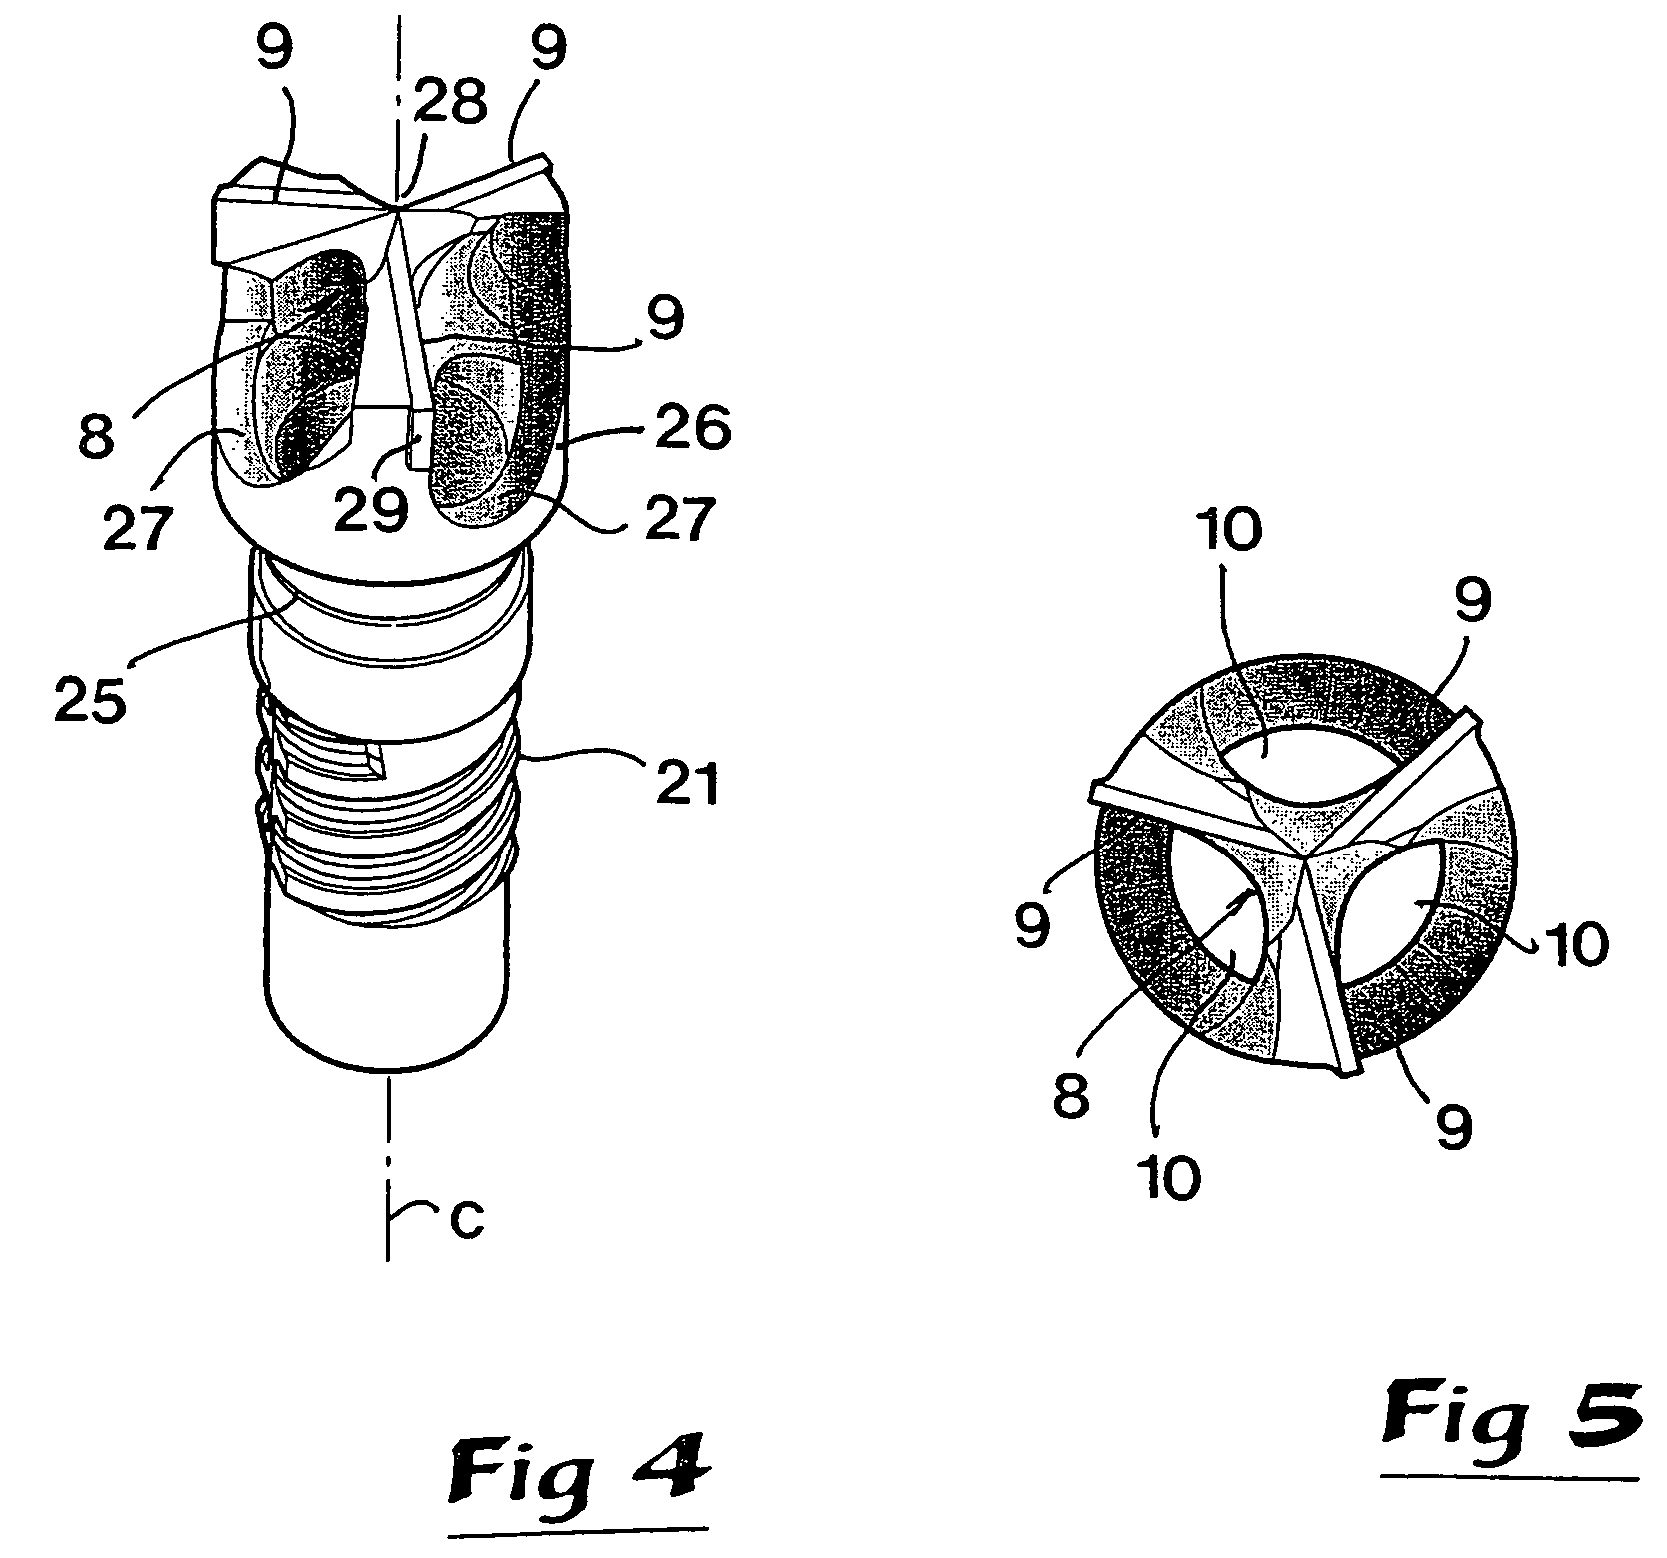 Edge-carrying drill body having an internal chip-removal channel